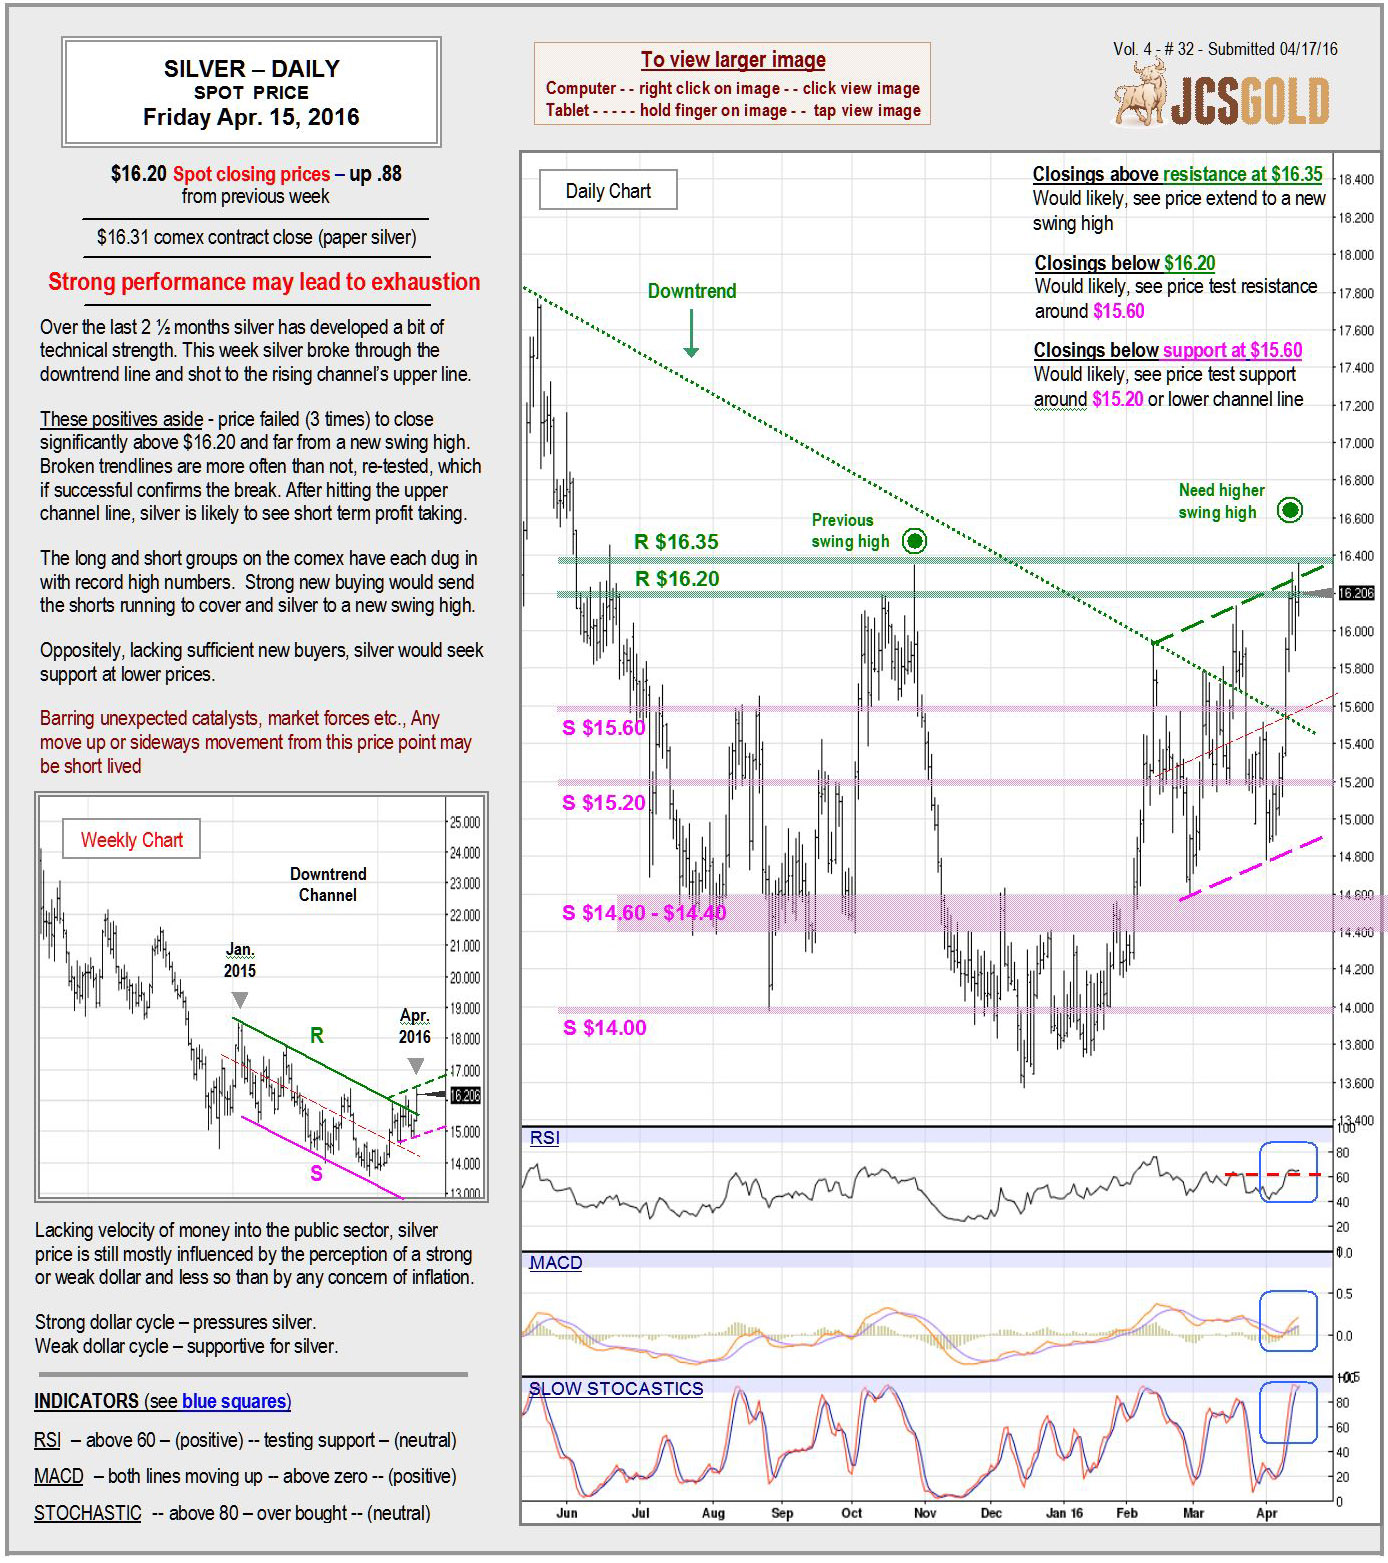 April 15, 2016 chart & commentary